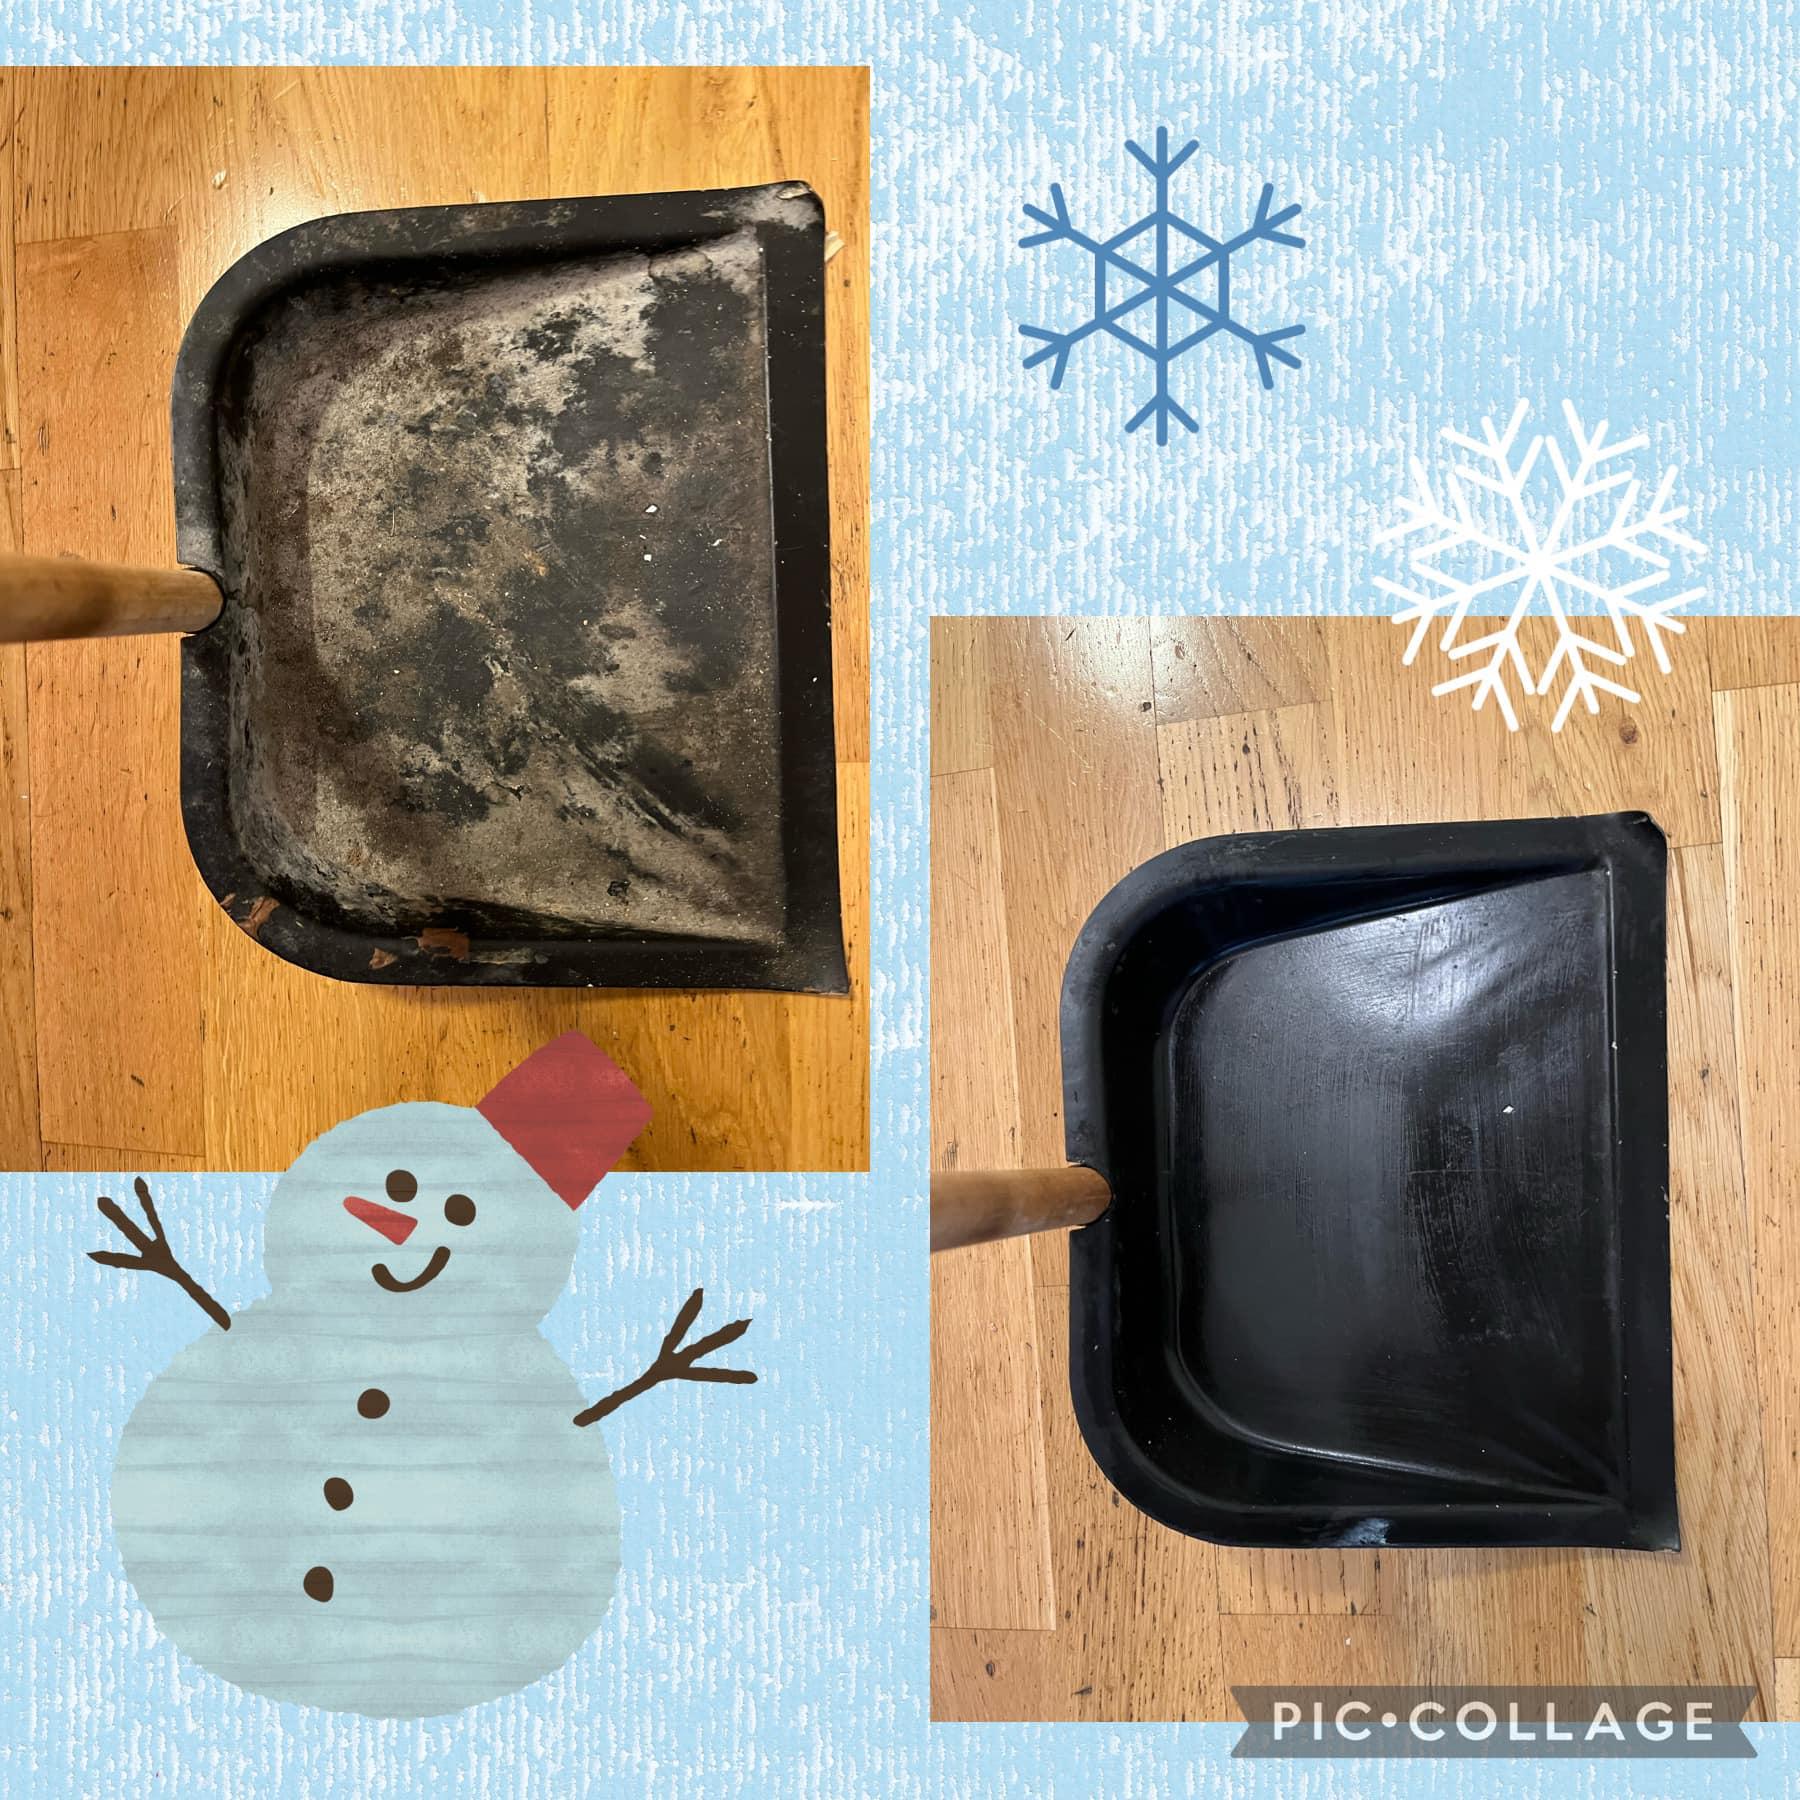 Before and after cleaning the black kitchen scoop.